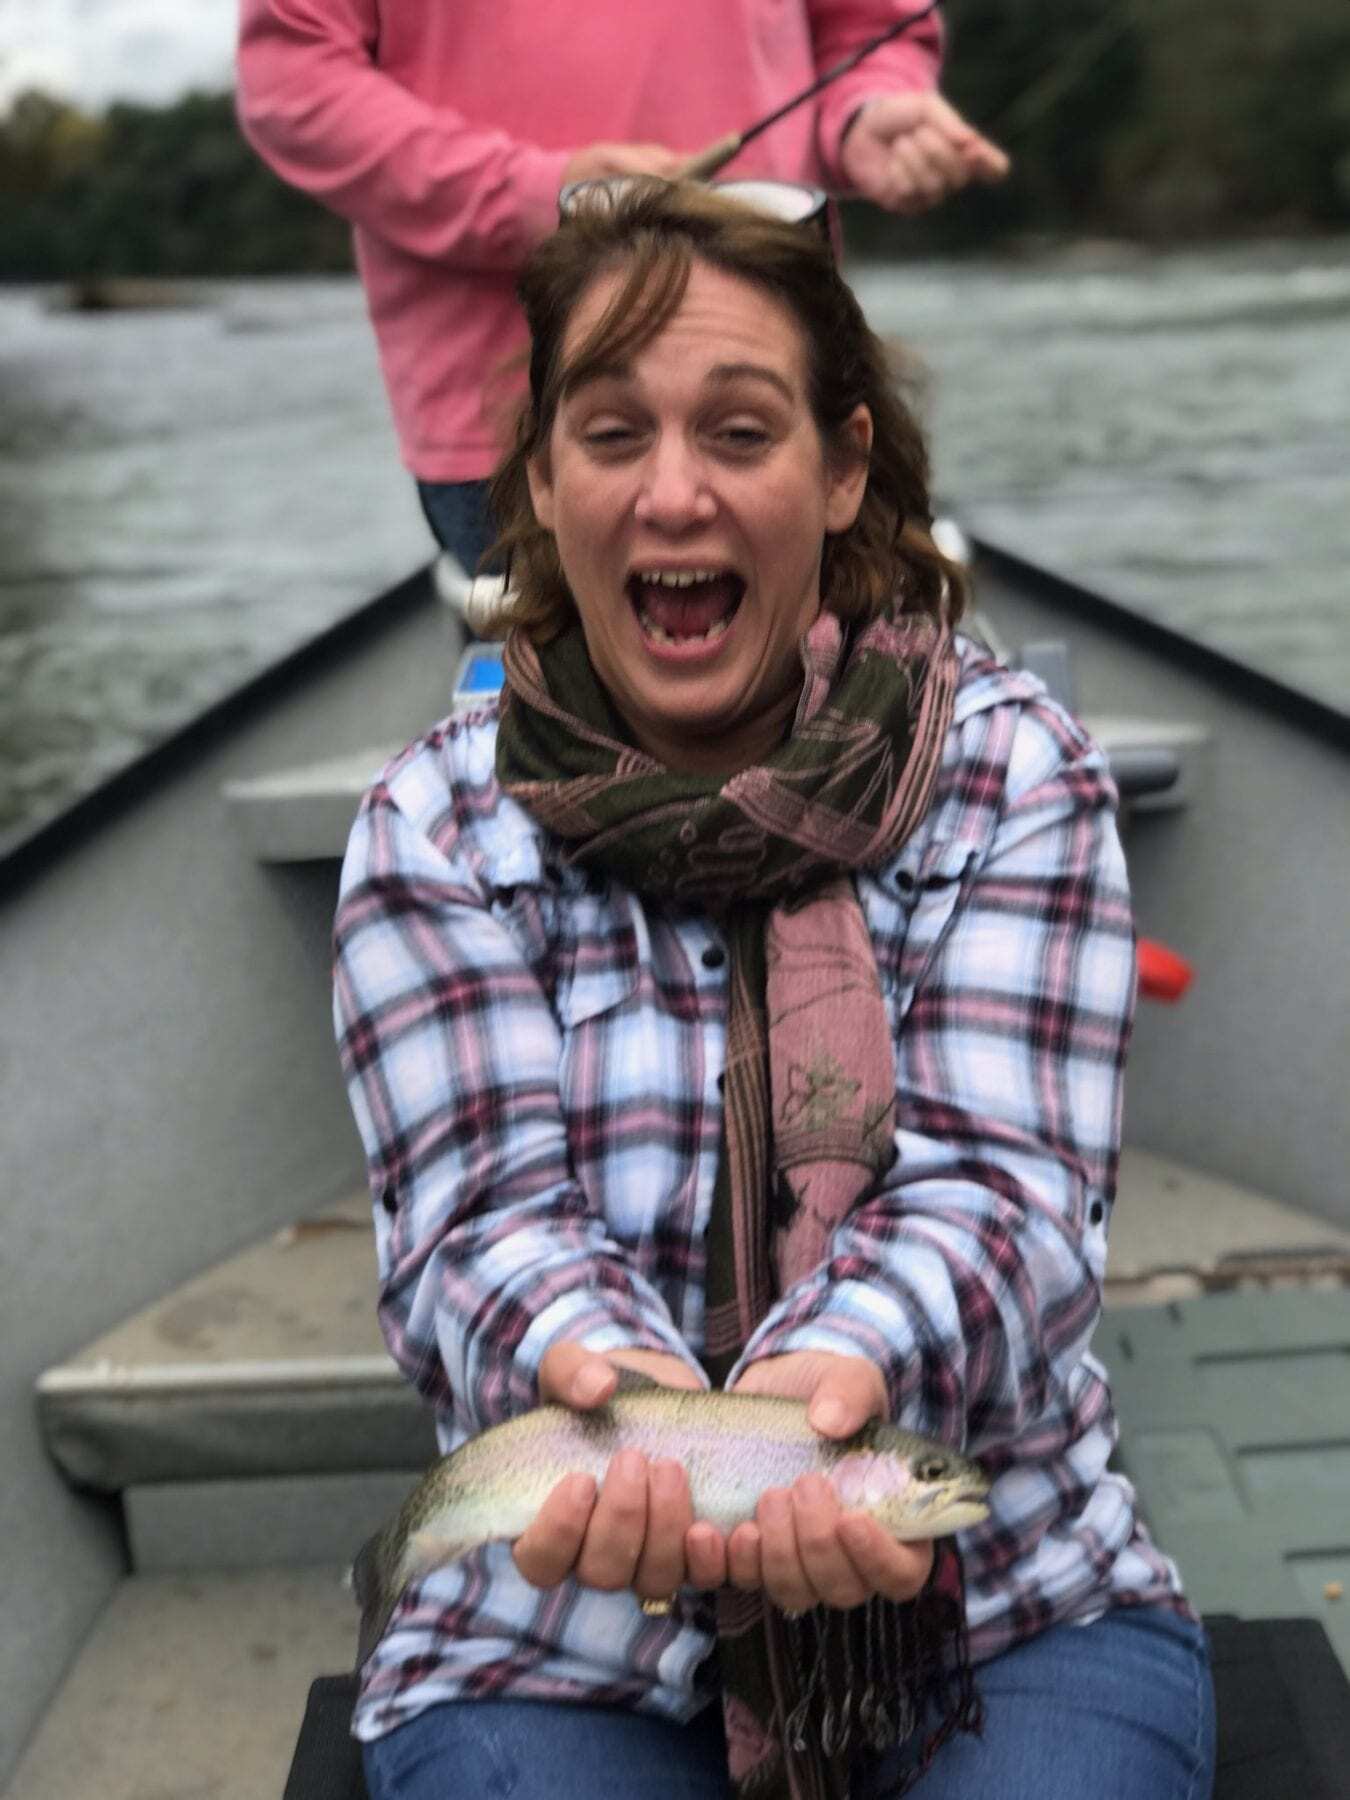 Travel blogger Kathy Brown and her husband Steve sitting in a samll fishing boat. Kathy has caught a fish and is holding it up for the camera with excitement. Her Husband looks in amazement in what she has caught before throwing back into the lake.